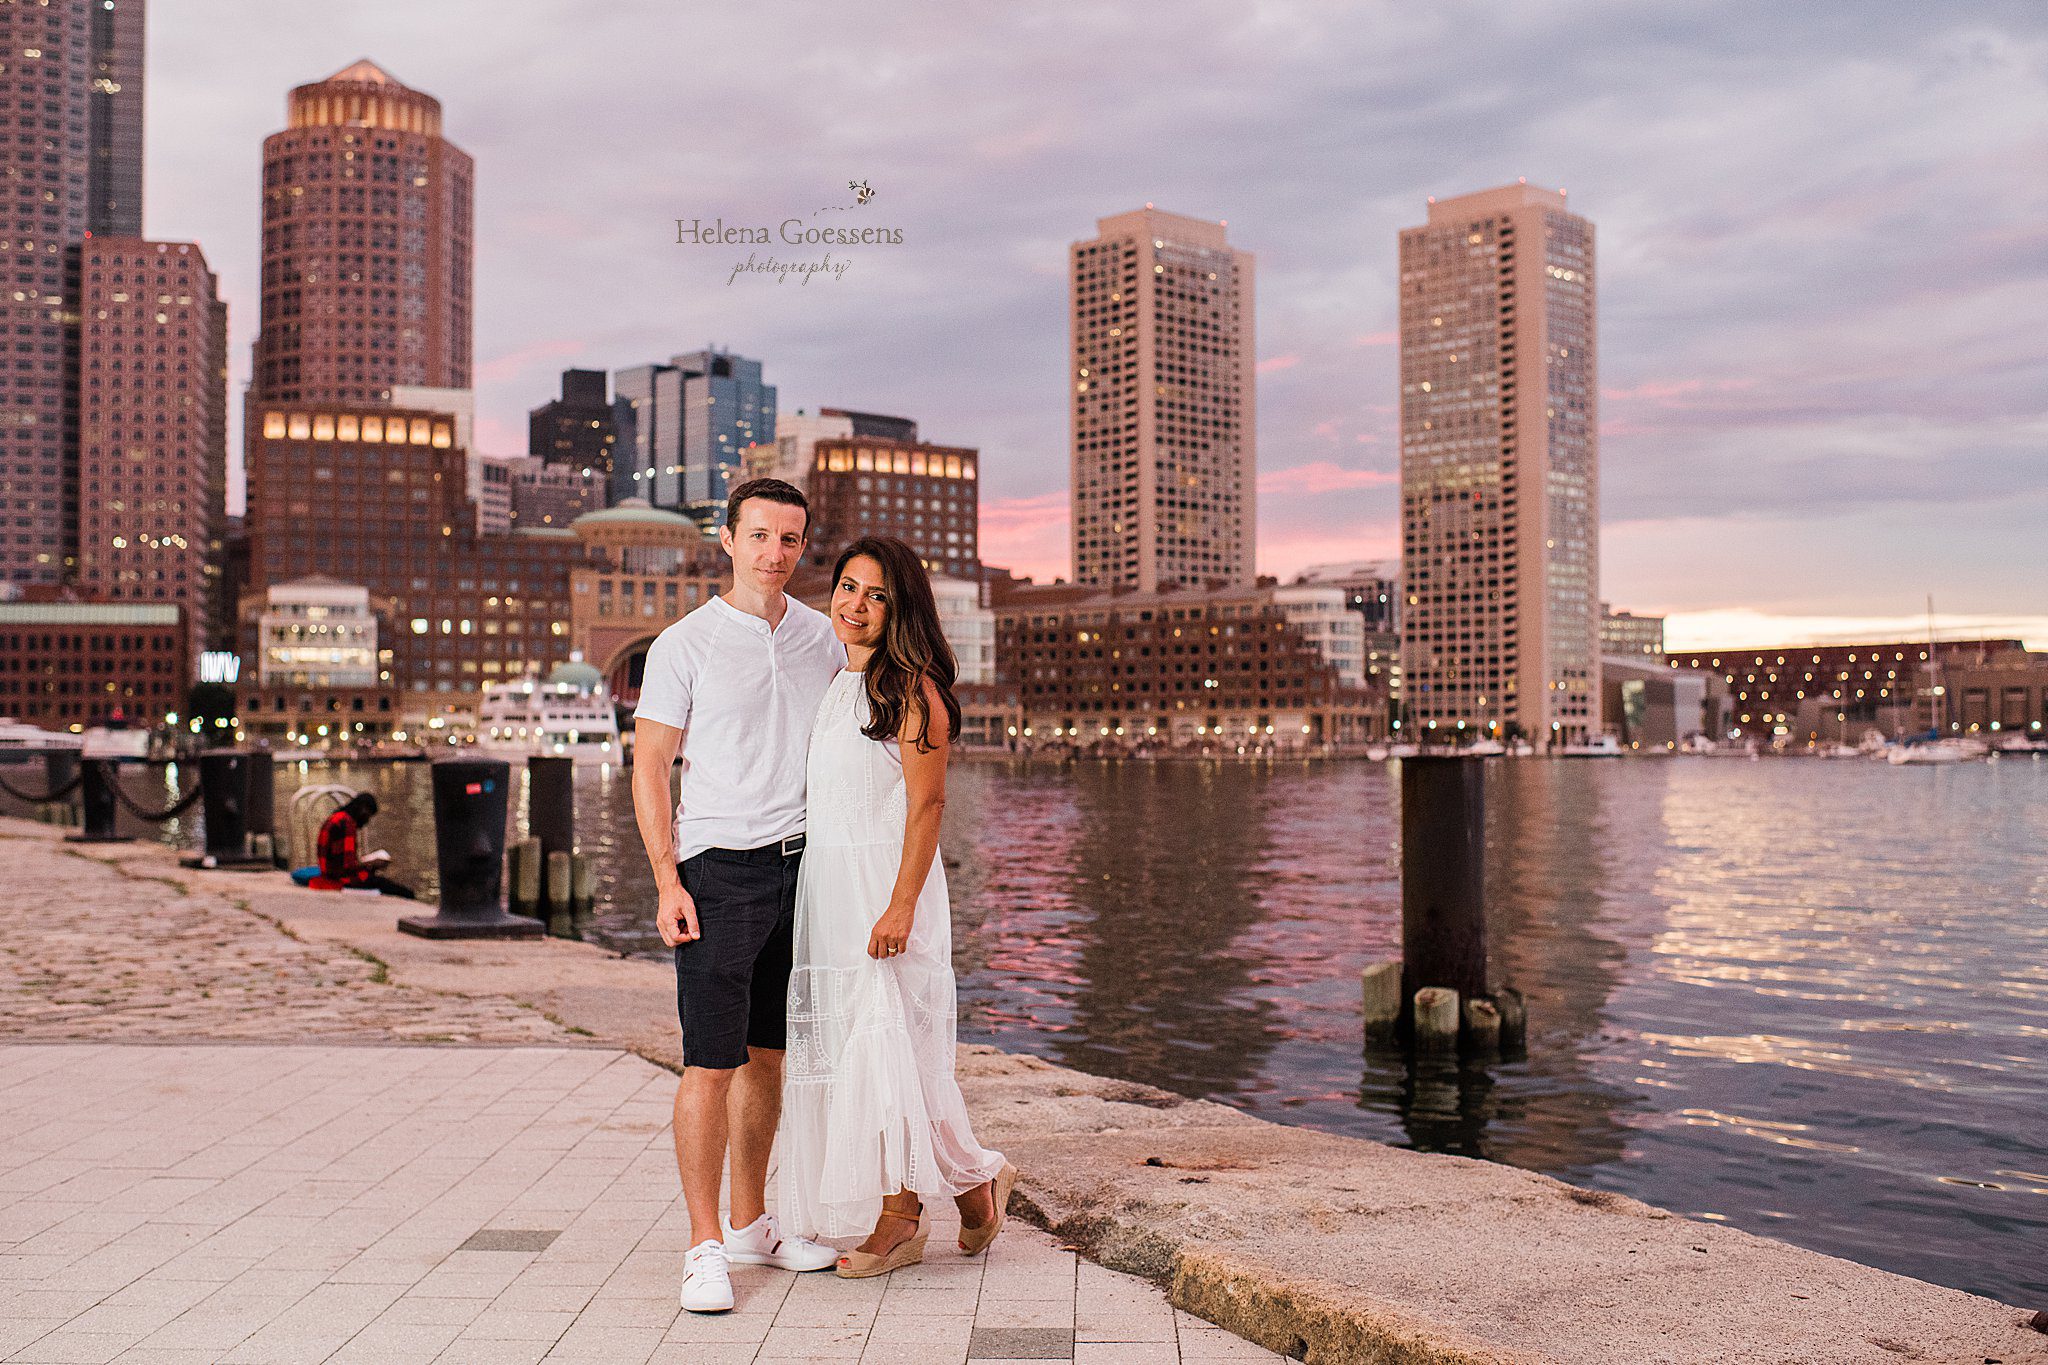 dramatic sunset during Fan Pier Boston Family Session with Helena Goessens Photography